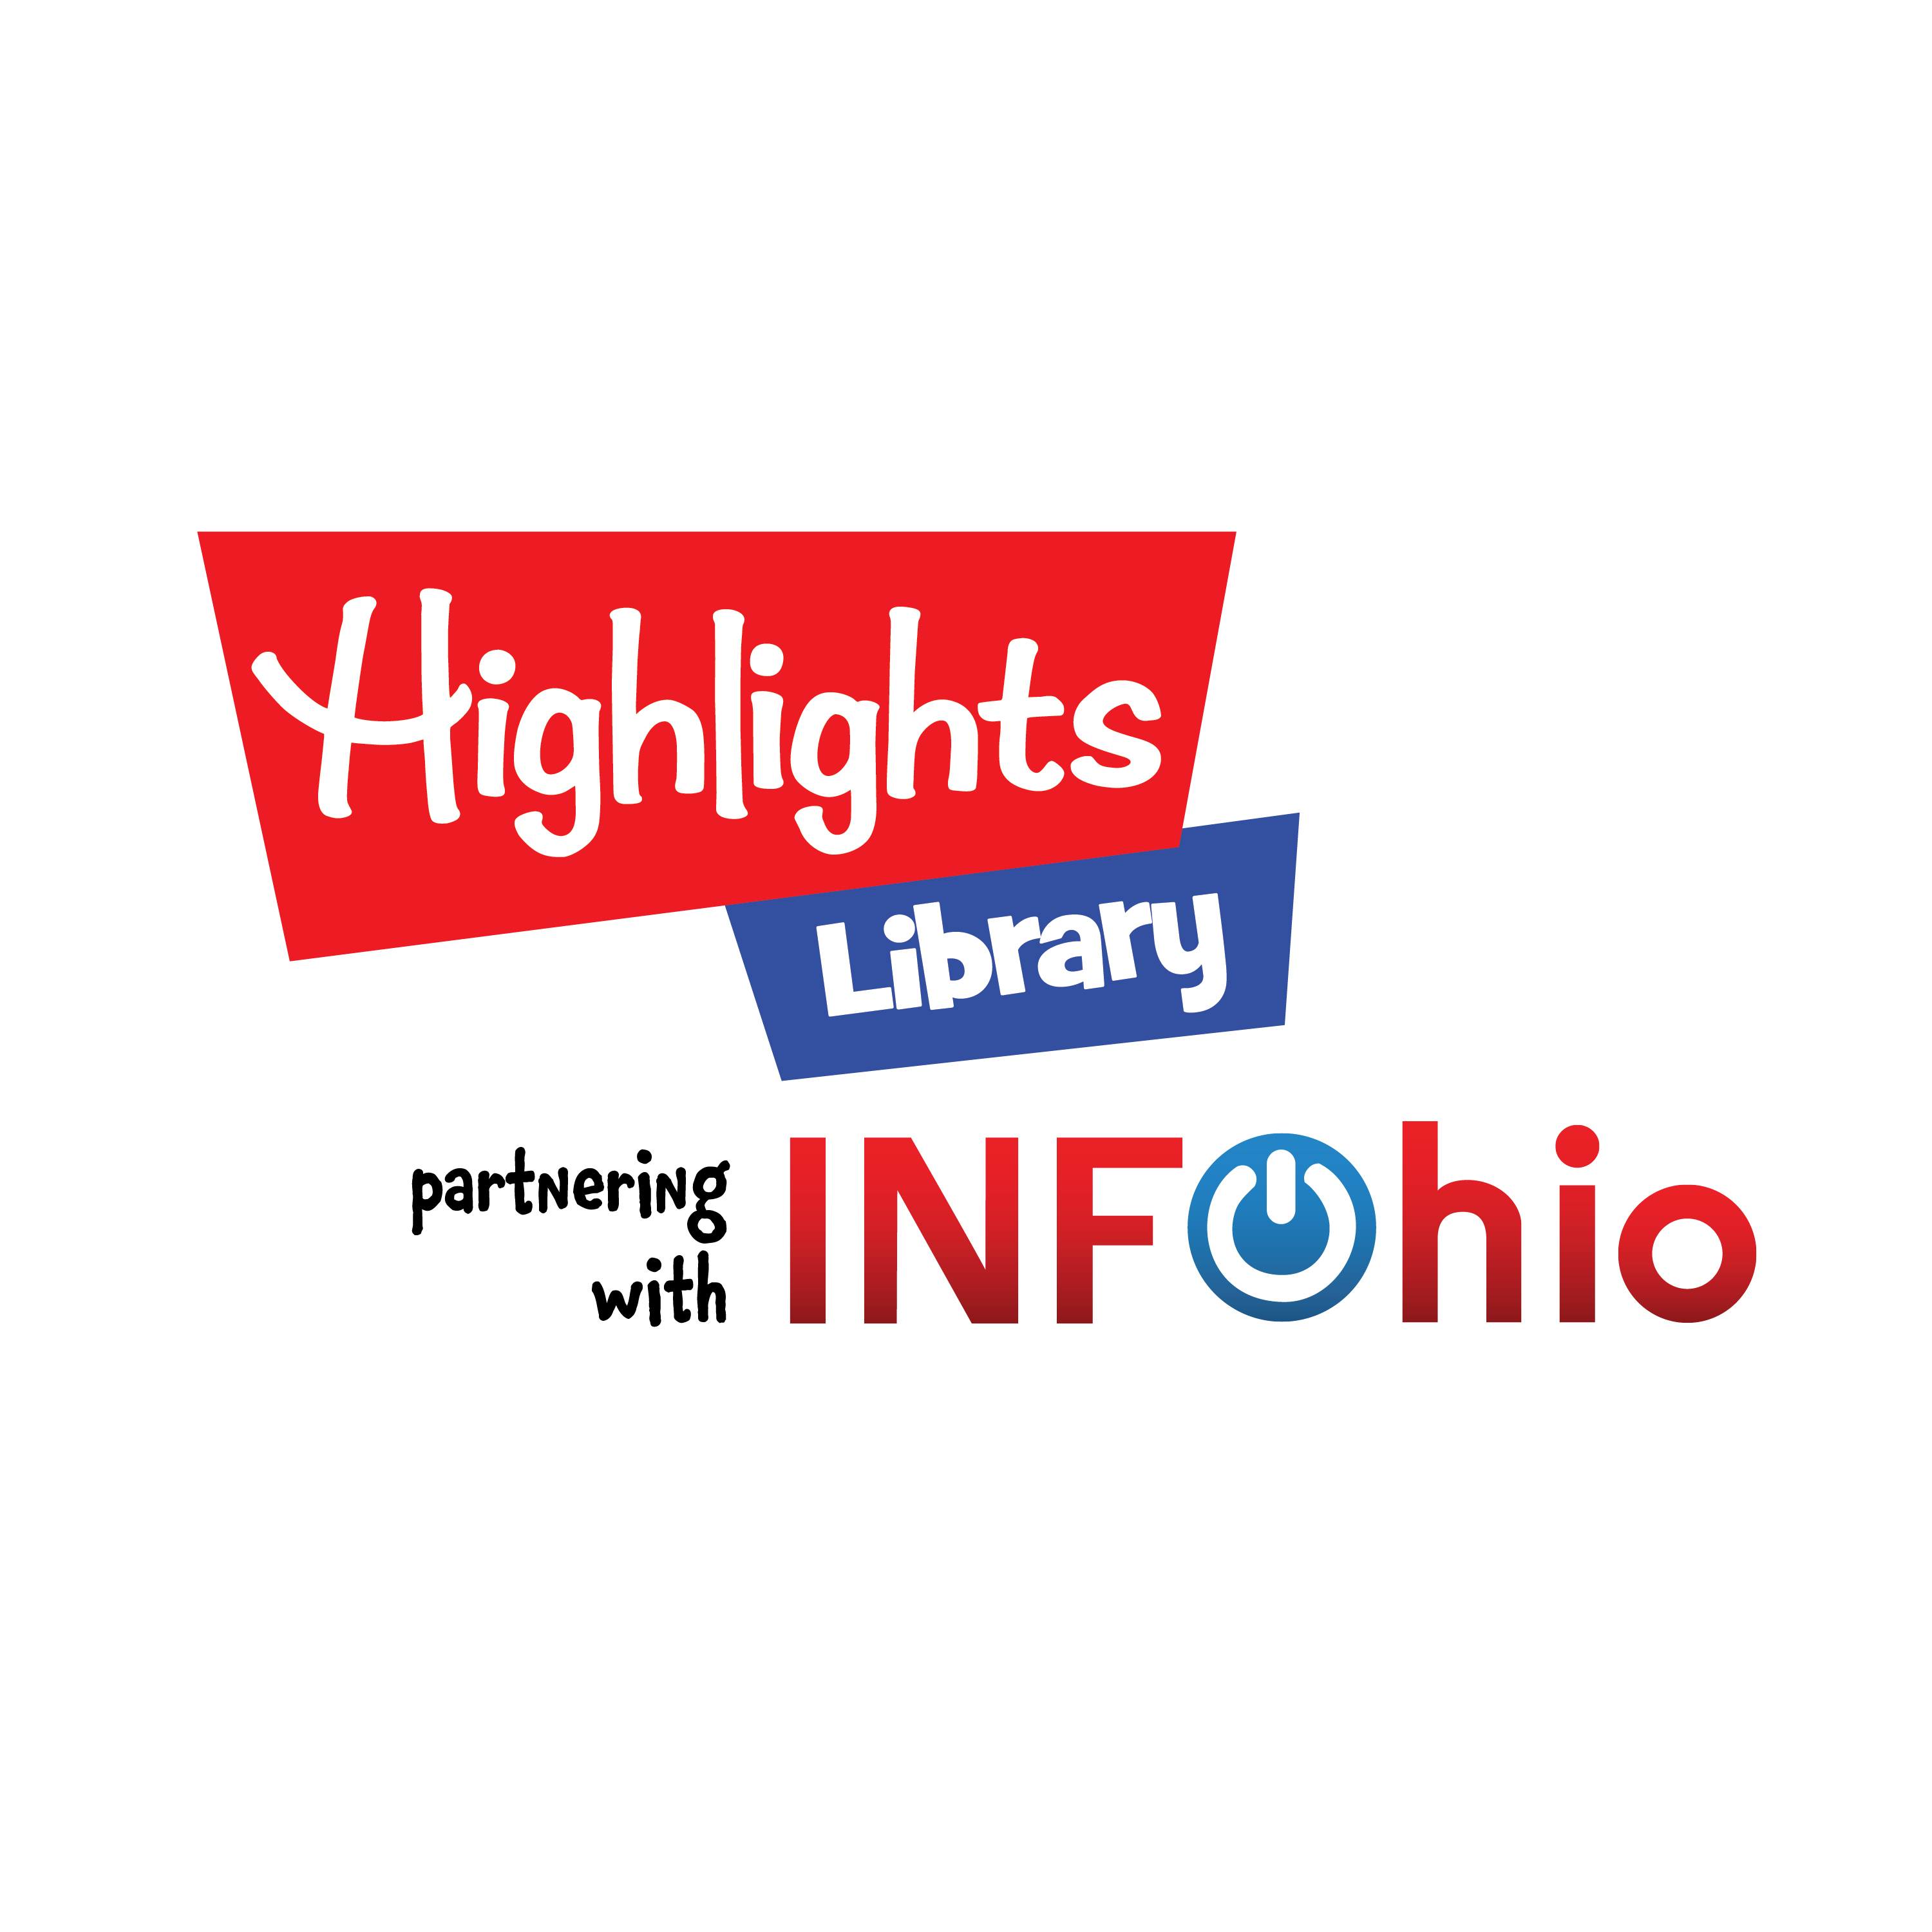 A New INFOhio Partnership: Highlights Library is Here!